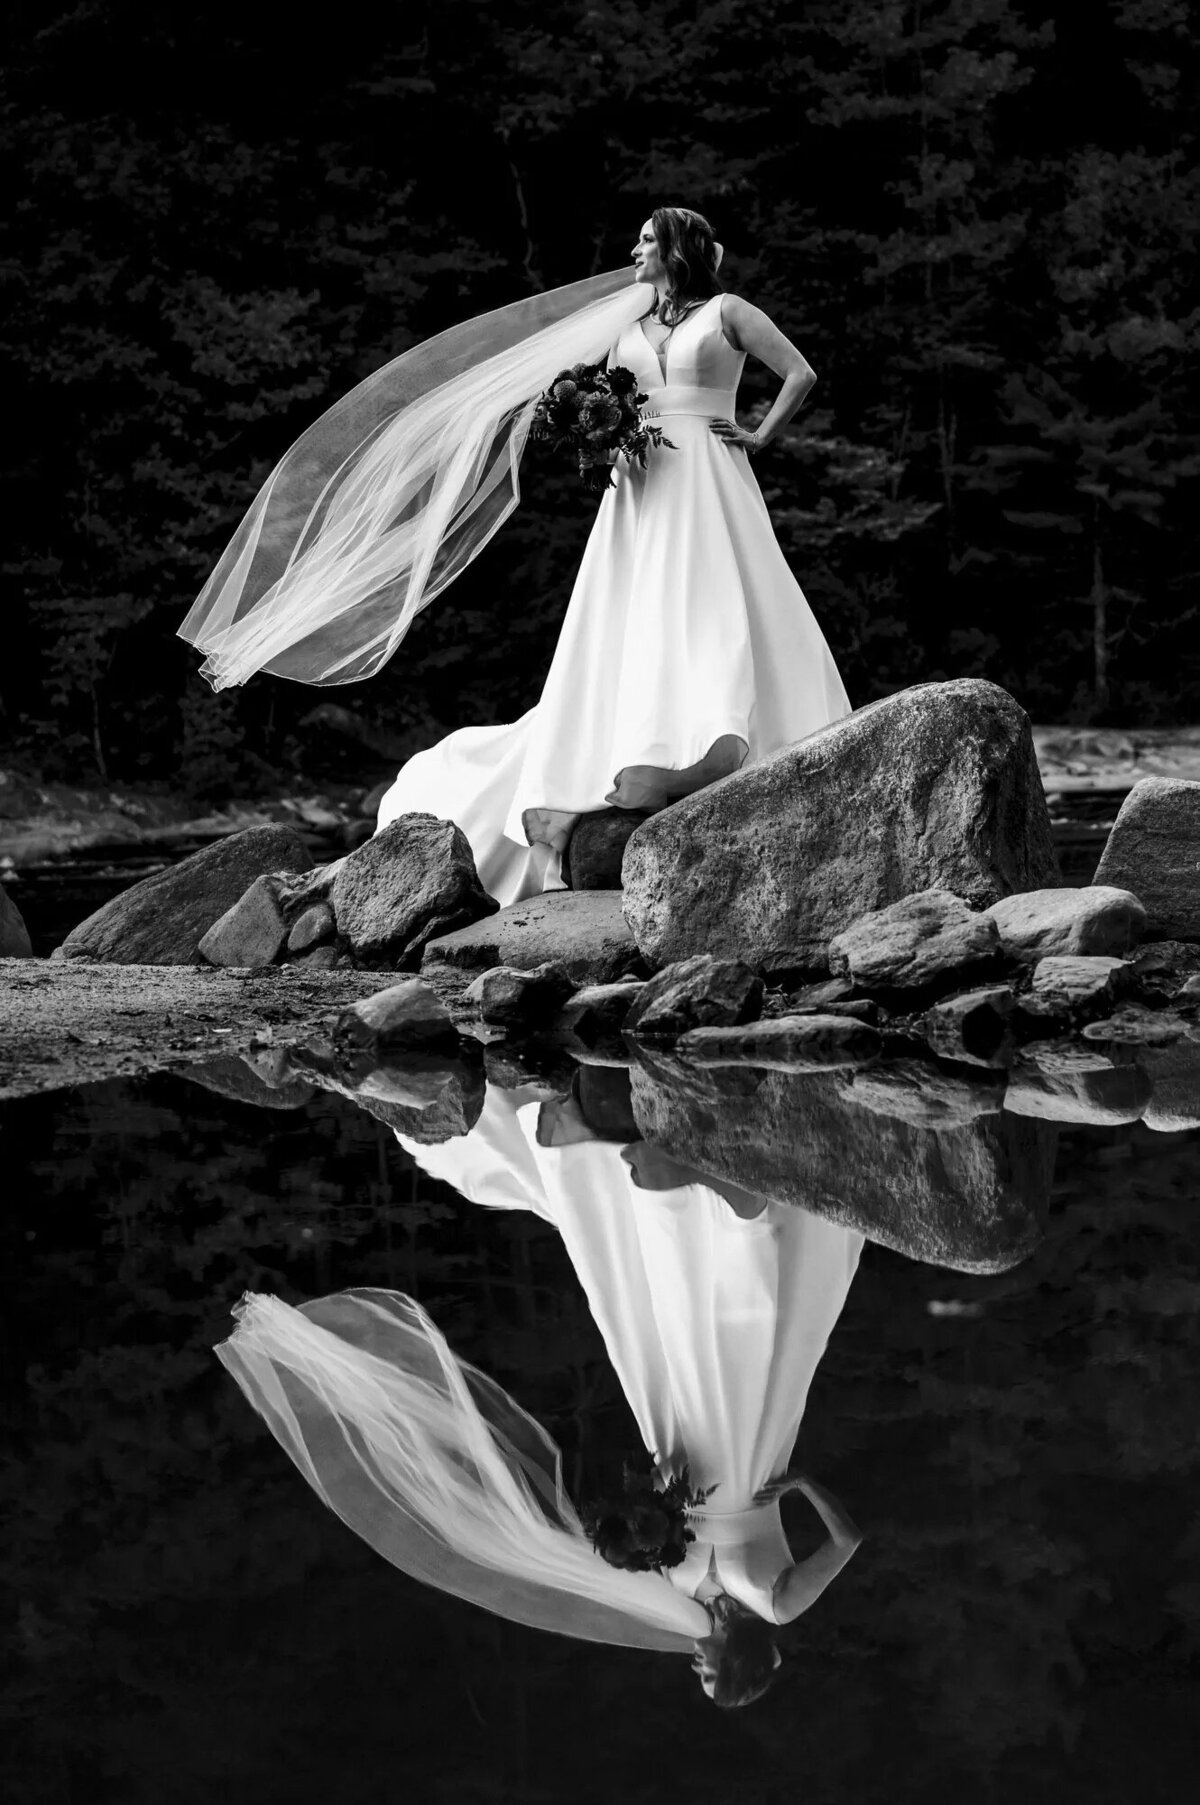 A stunning black and white image of a bride standing on a rock by a calm lake, her reflection and the elegant lines of her dress mirrored perfectly in the water.